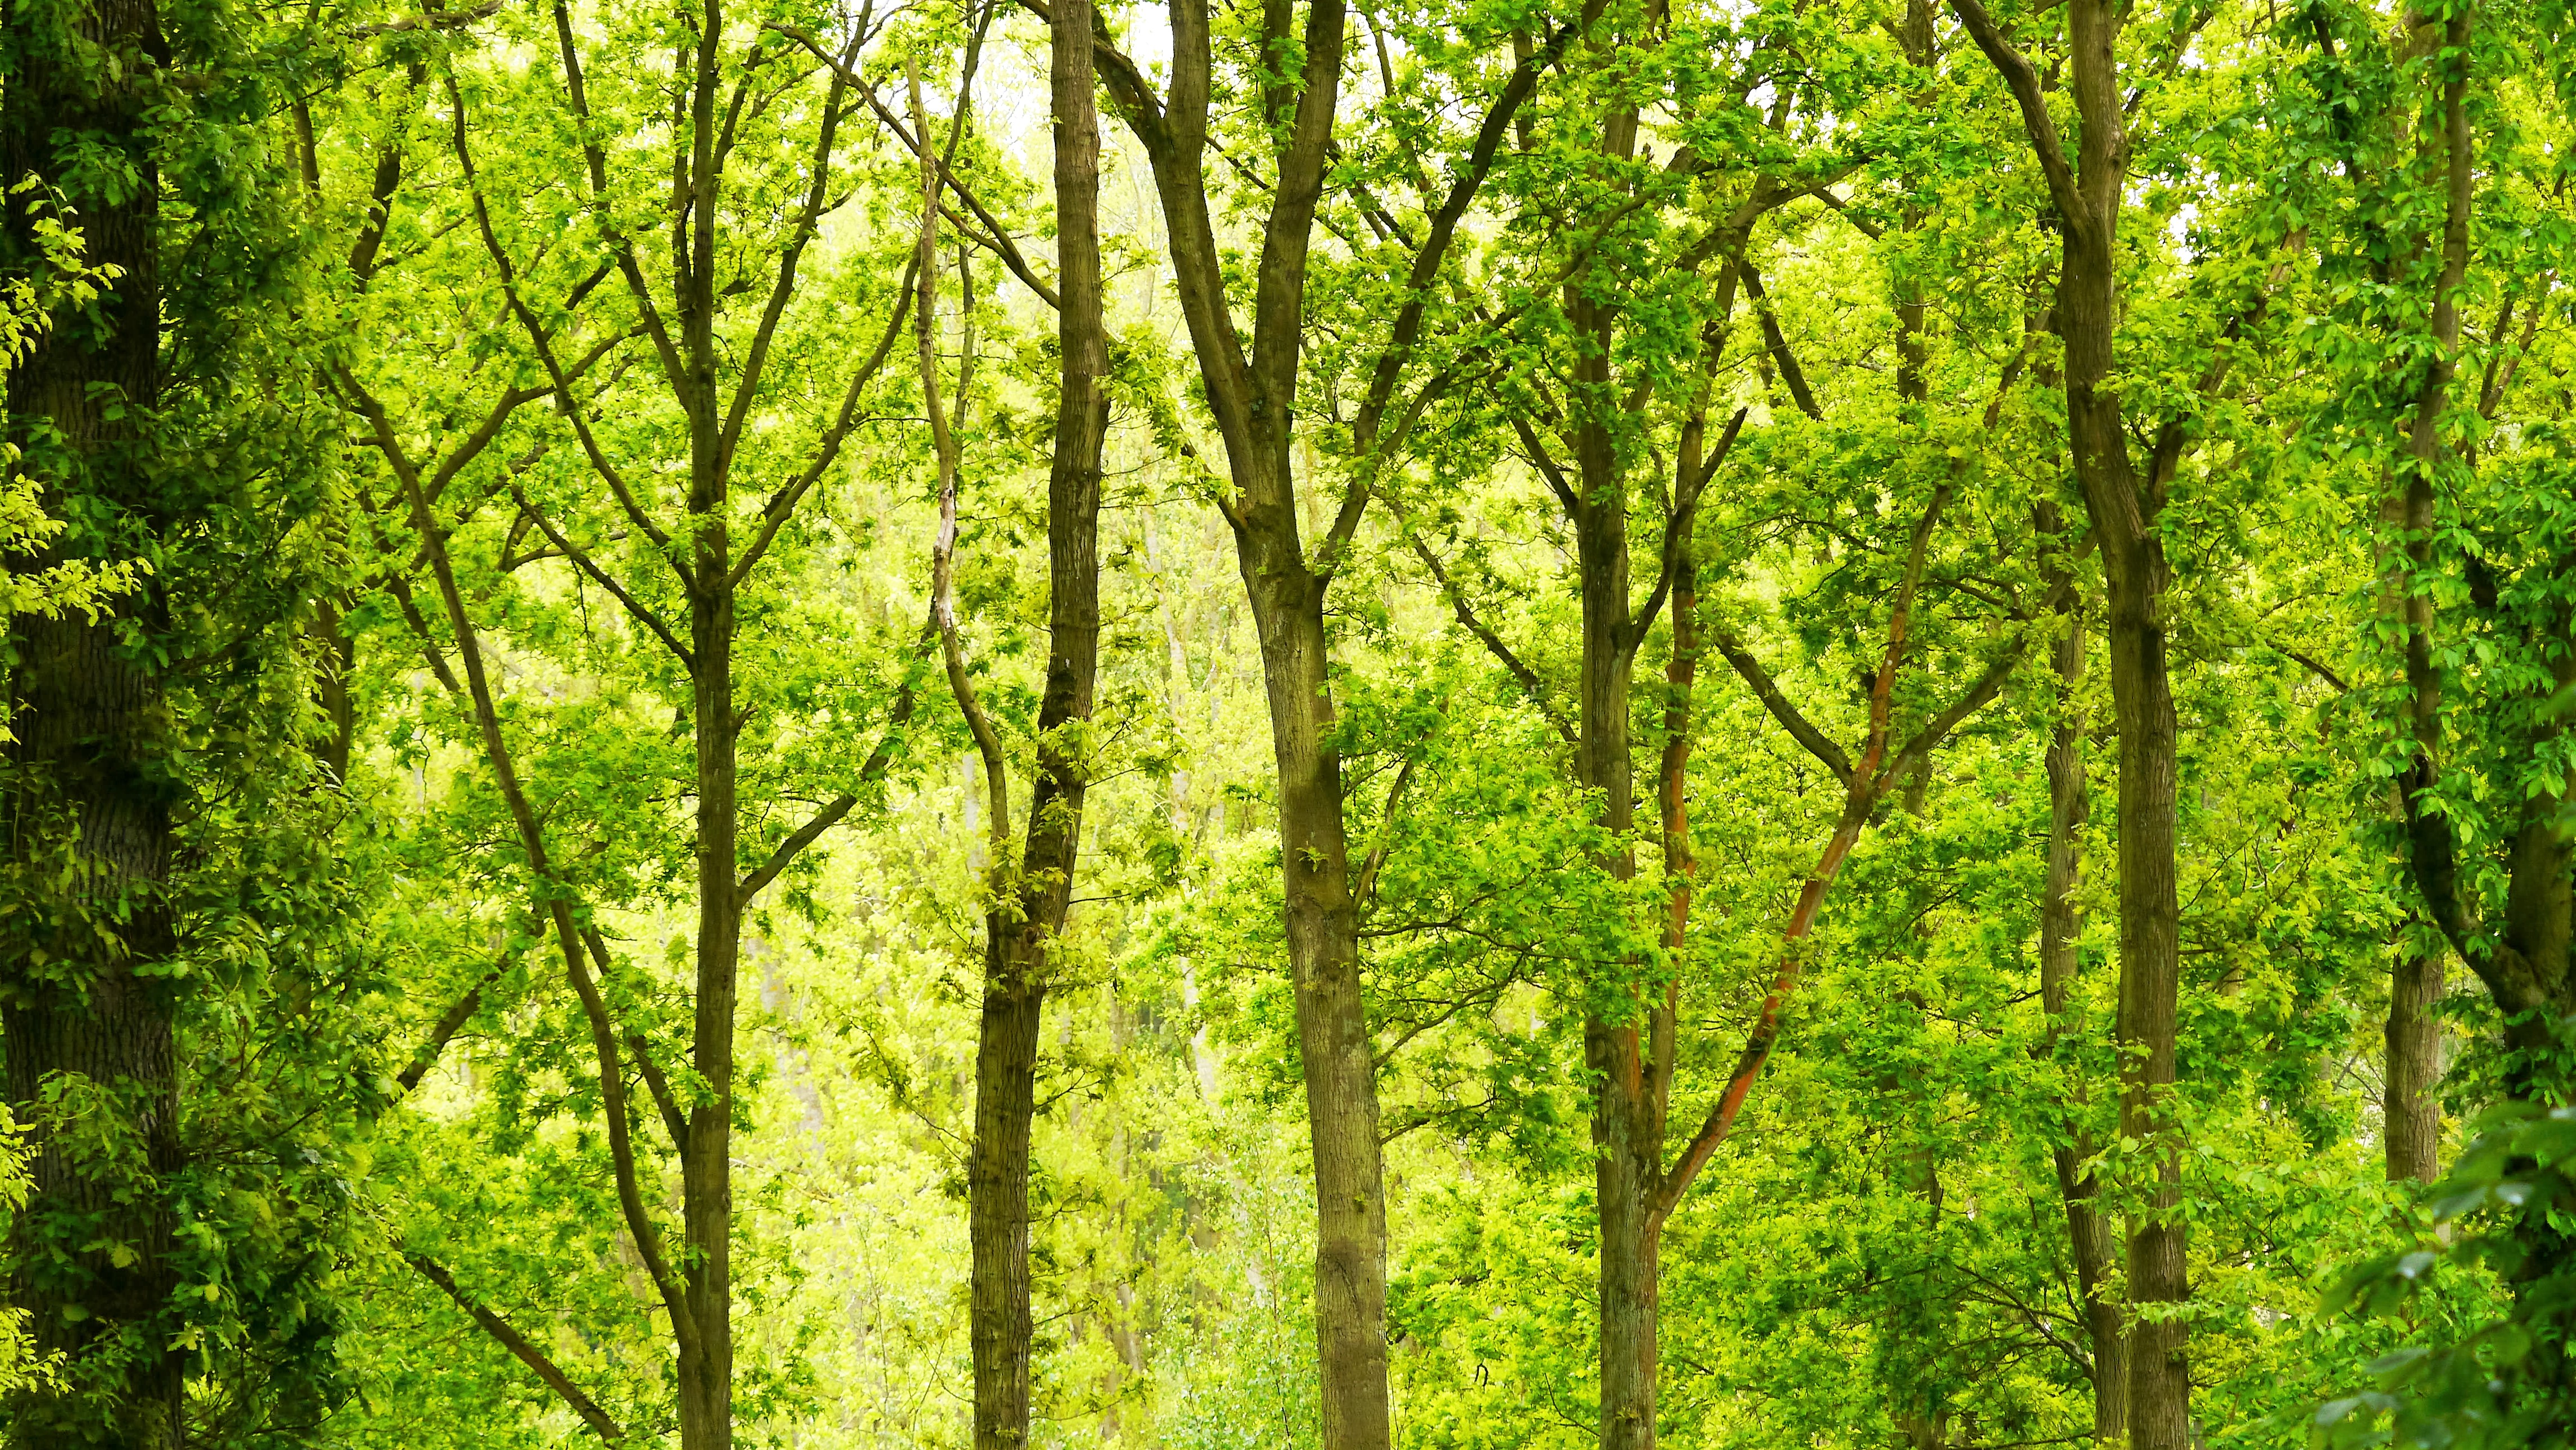 A forest of green foliage